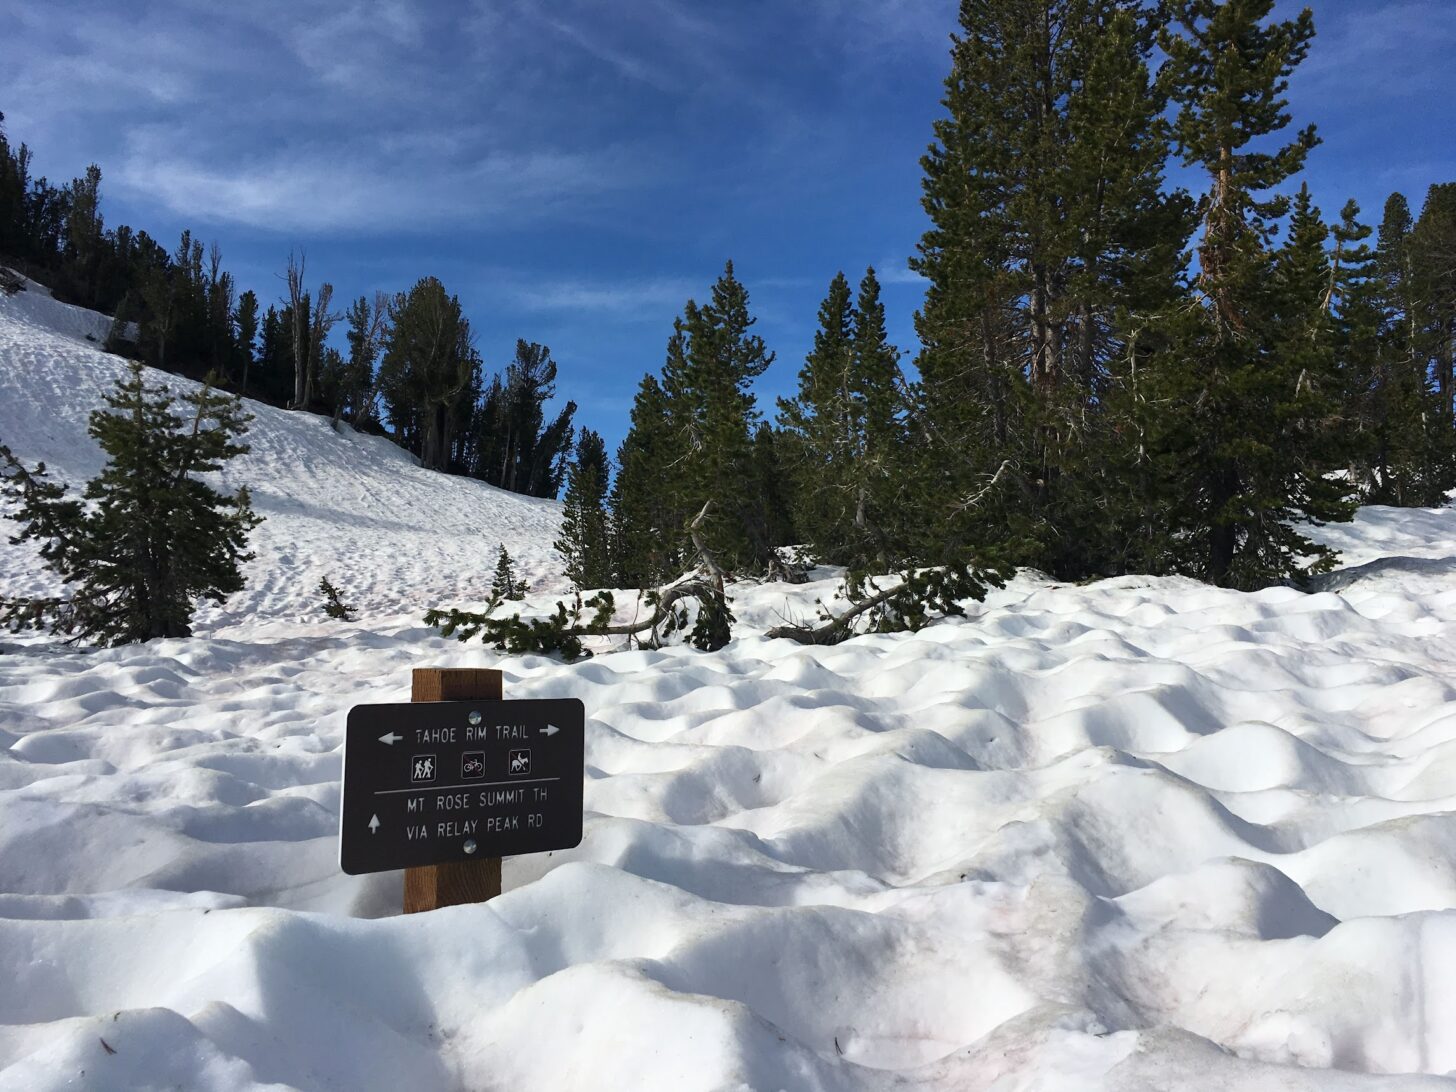 a trail sign almost completely covered by snow with trees in the background.